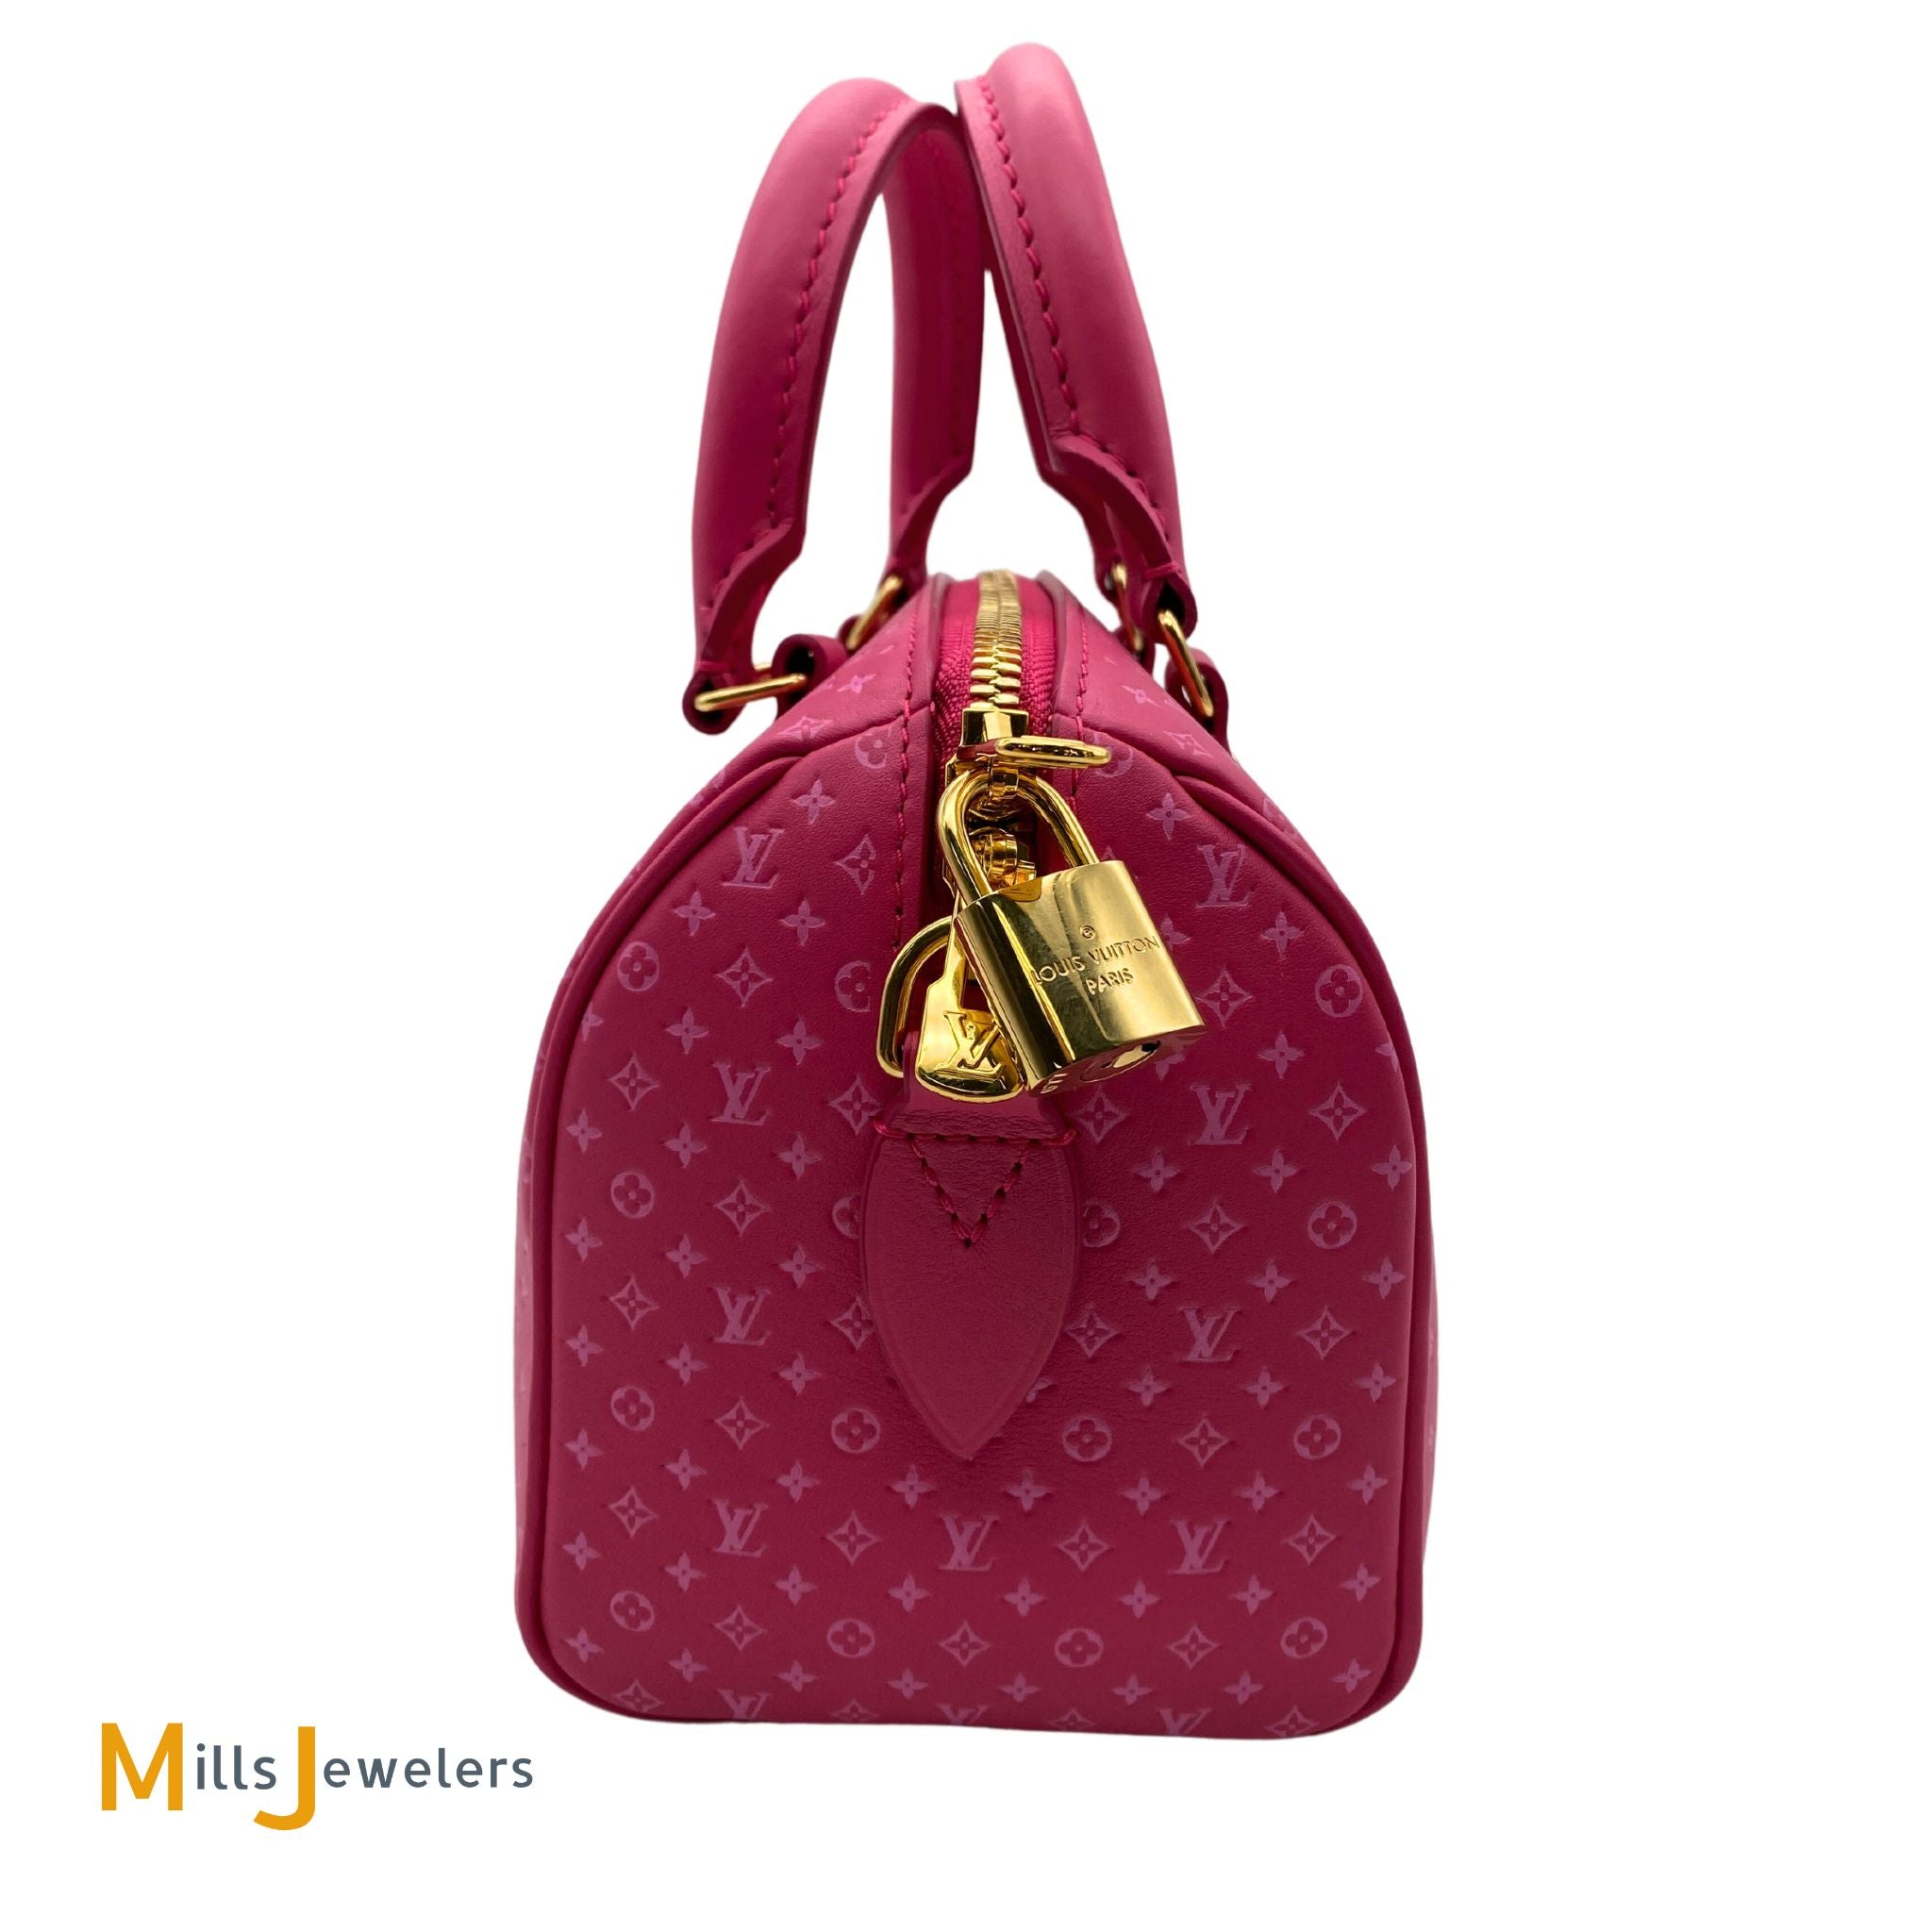 Louis Vuitton Speedy 30 Red Leather Handbag (Pre-Owned)